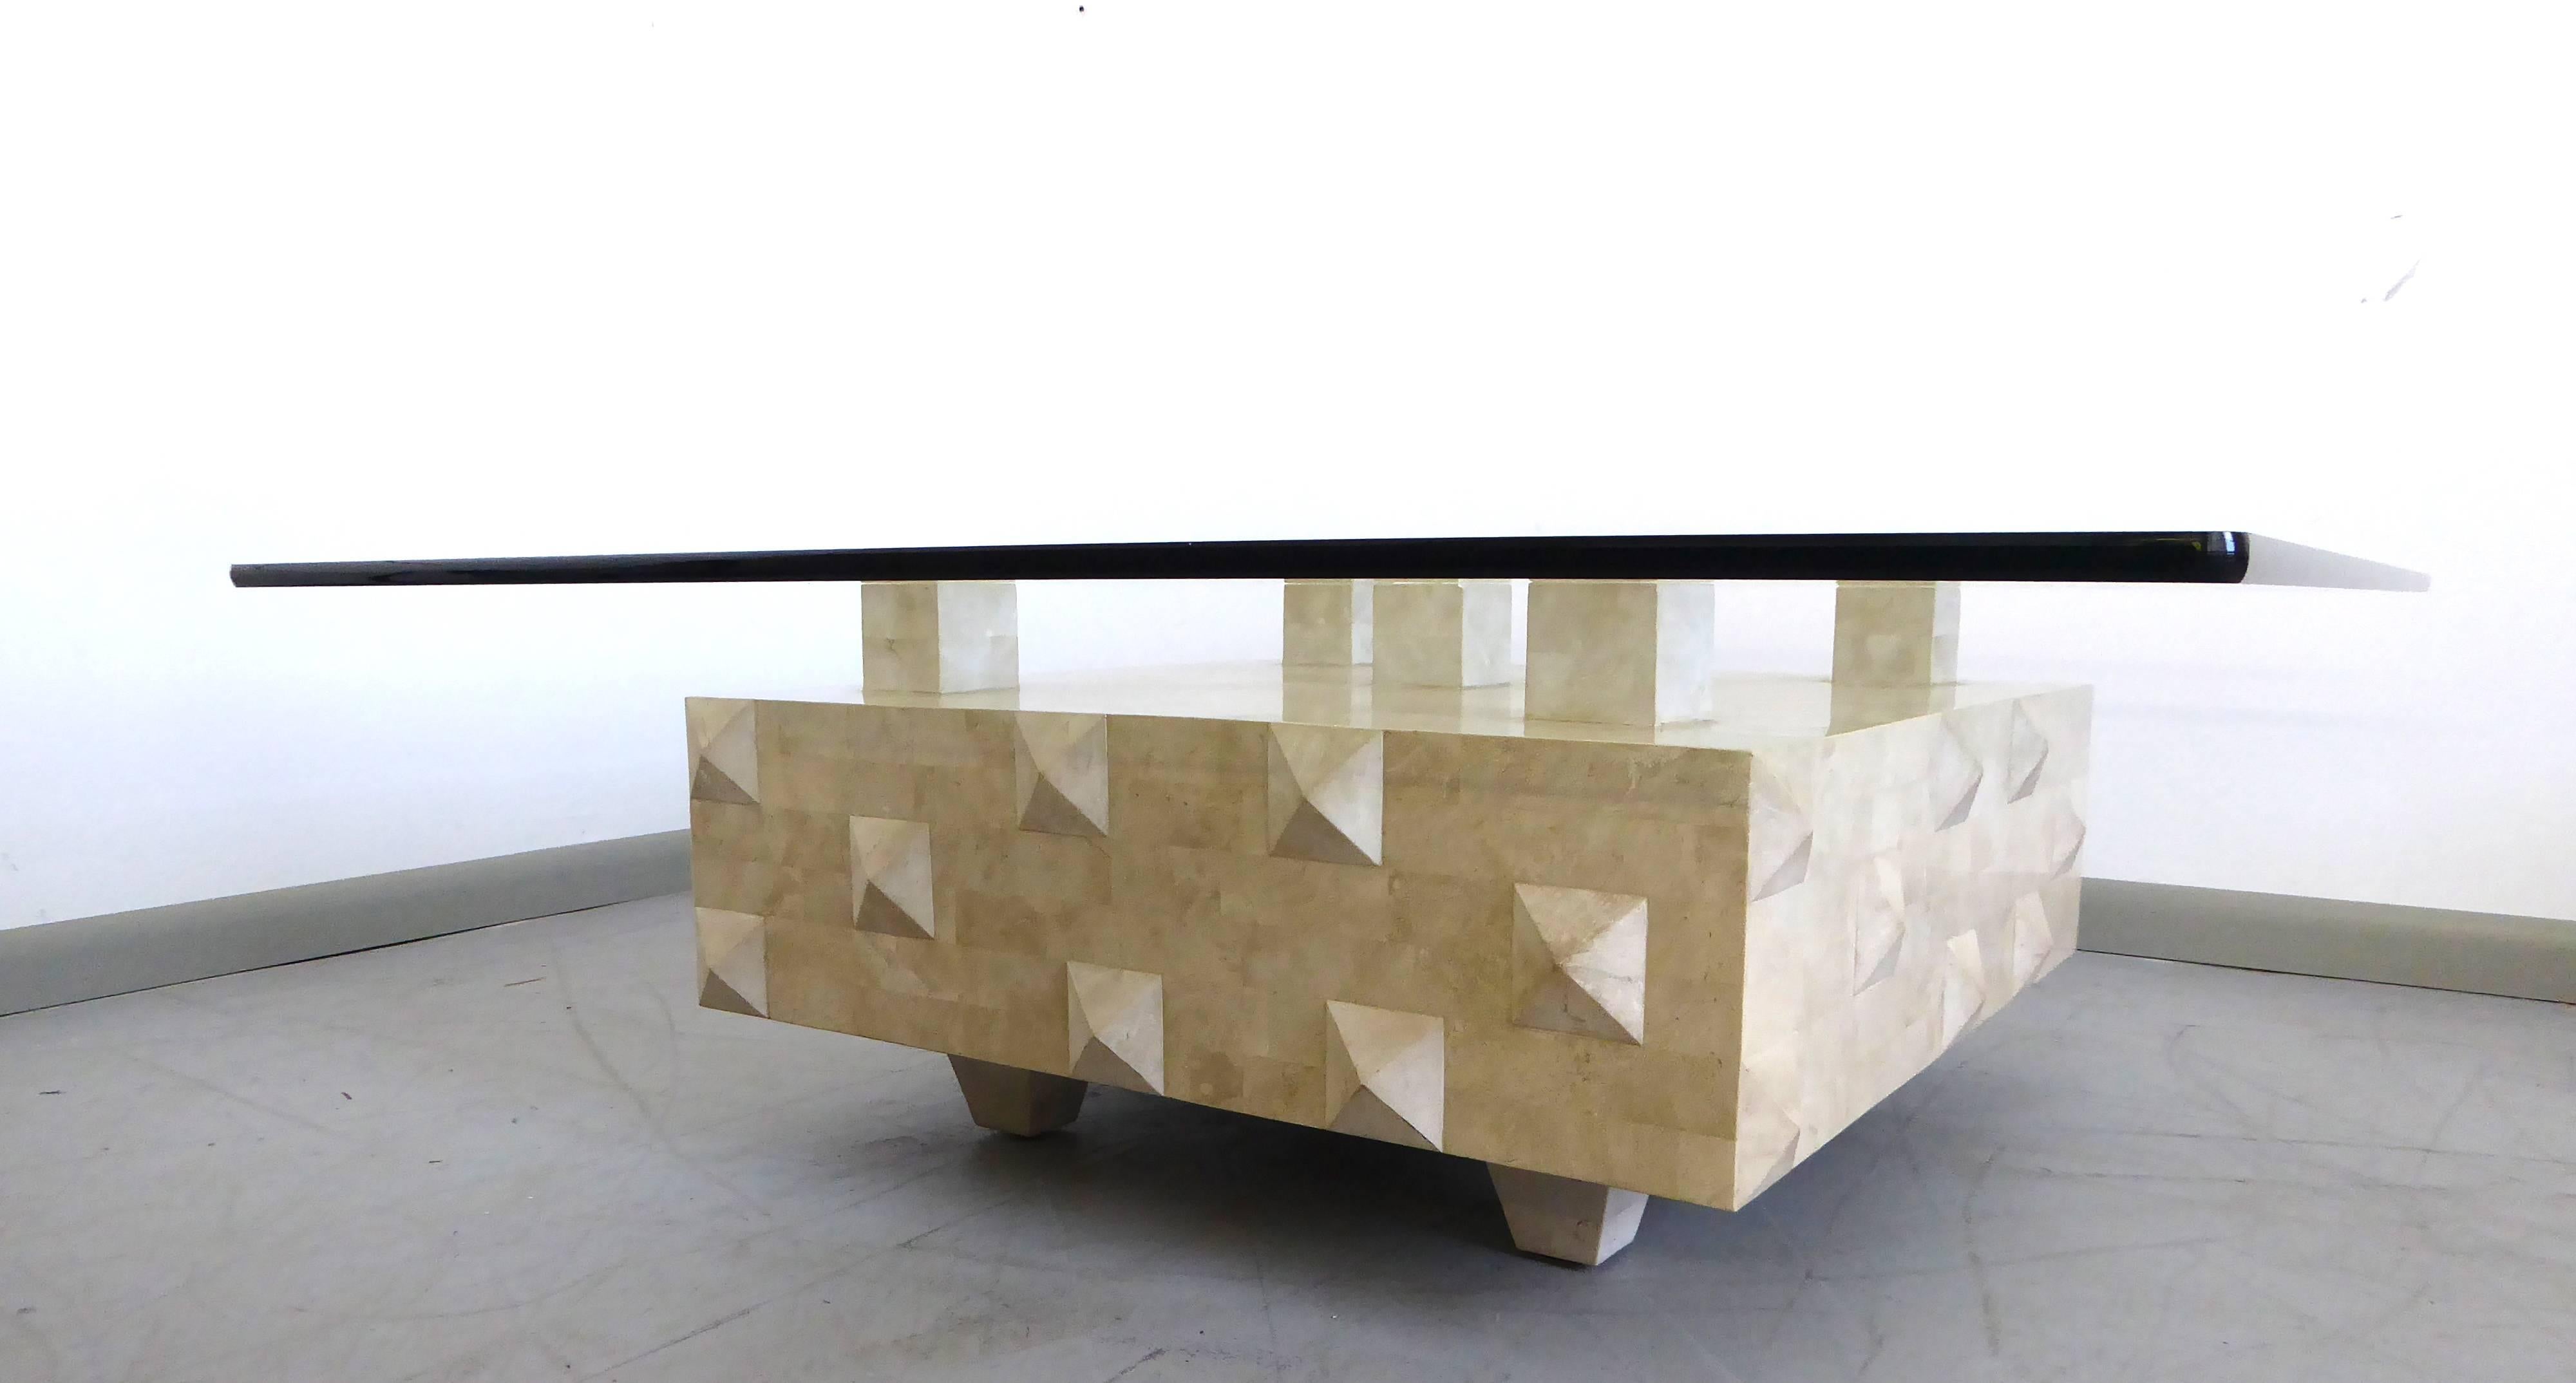 Outstanding and extremely rare vintage tessellated stone geometric studded "Tavola" cocktail table by Oggetti. Incredible design and detail. Italy, 1980s.